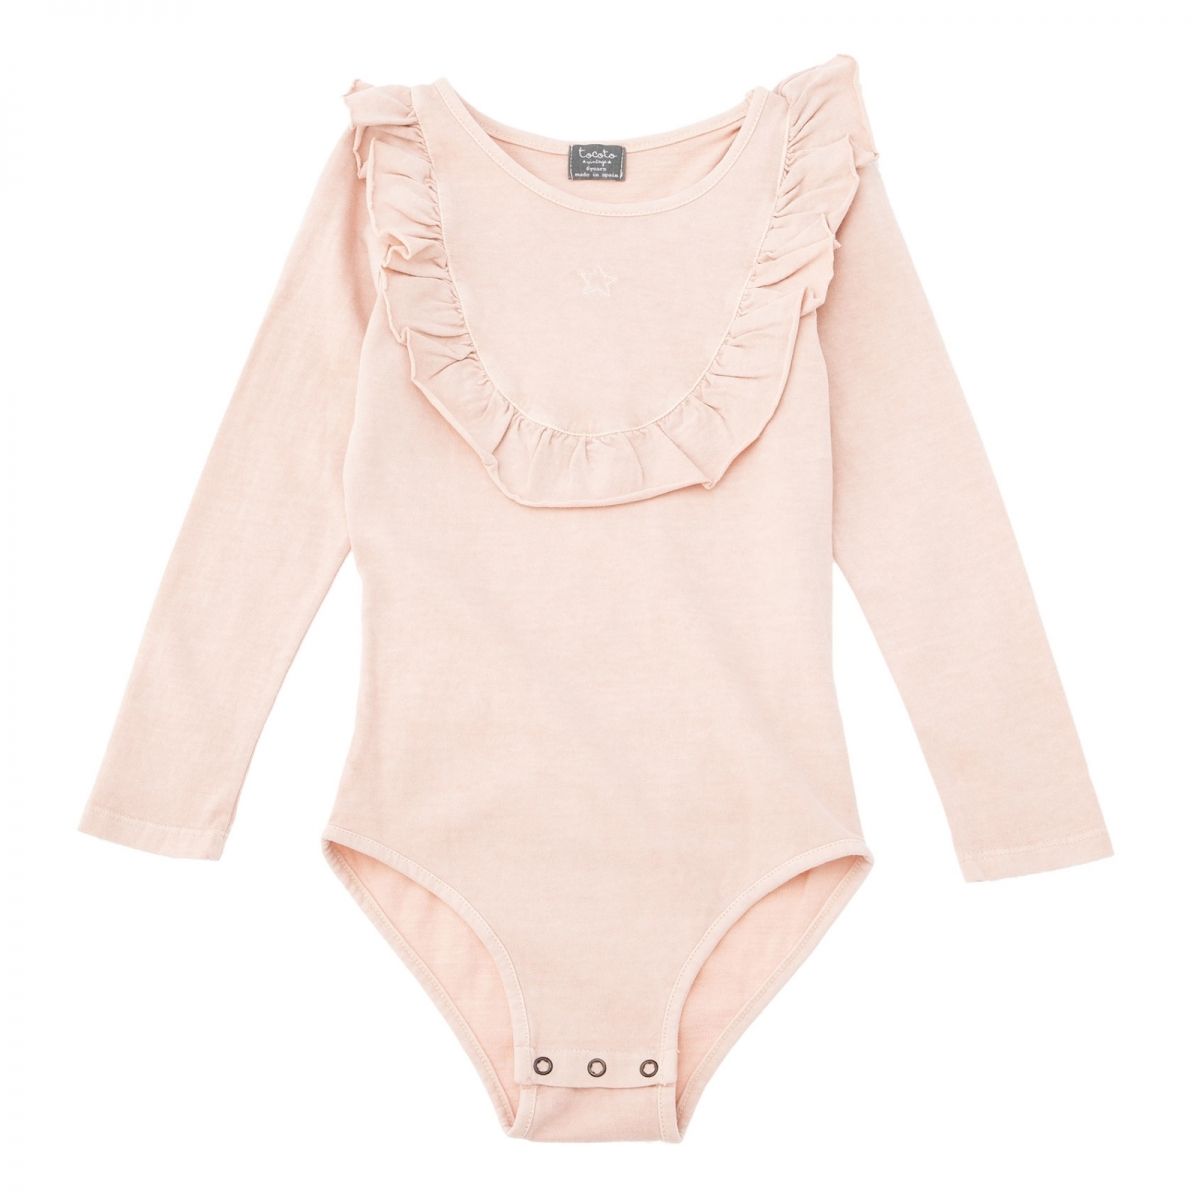 Tocoto Vintage - Jersey body with frill pink - Body & Underwear - W51819PINK 